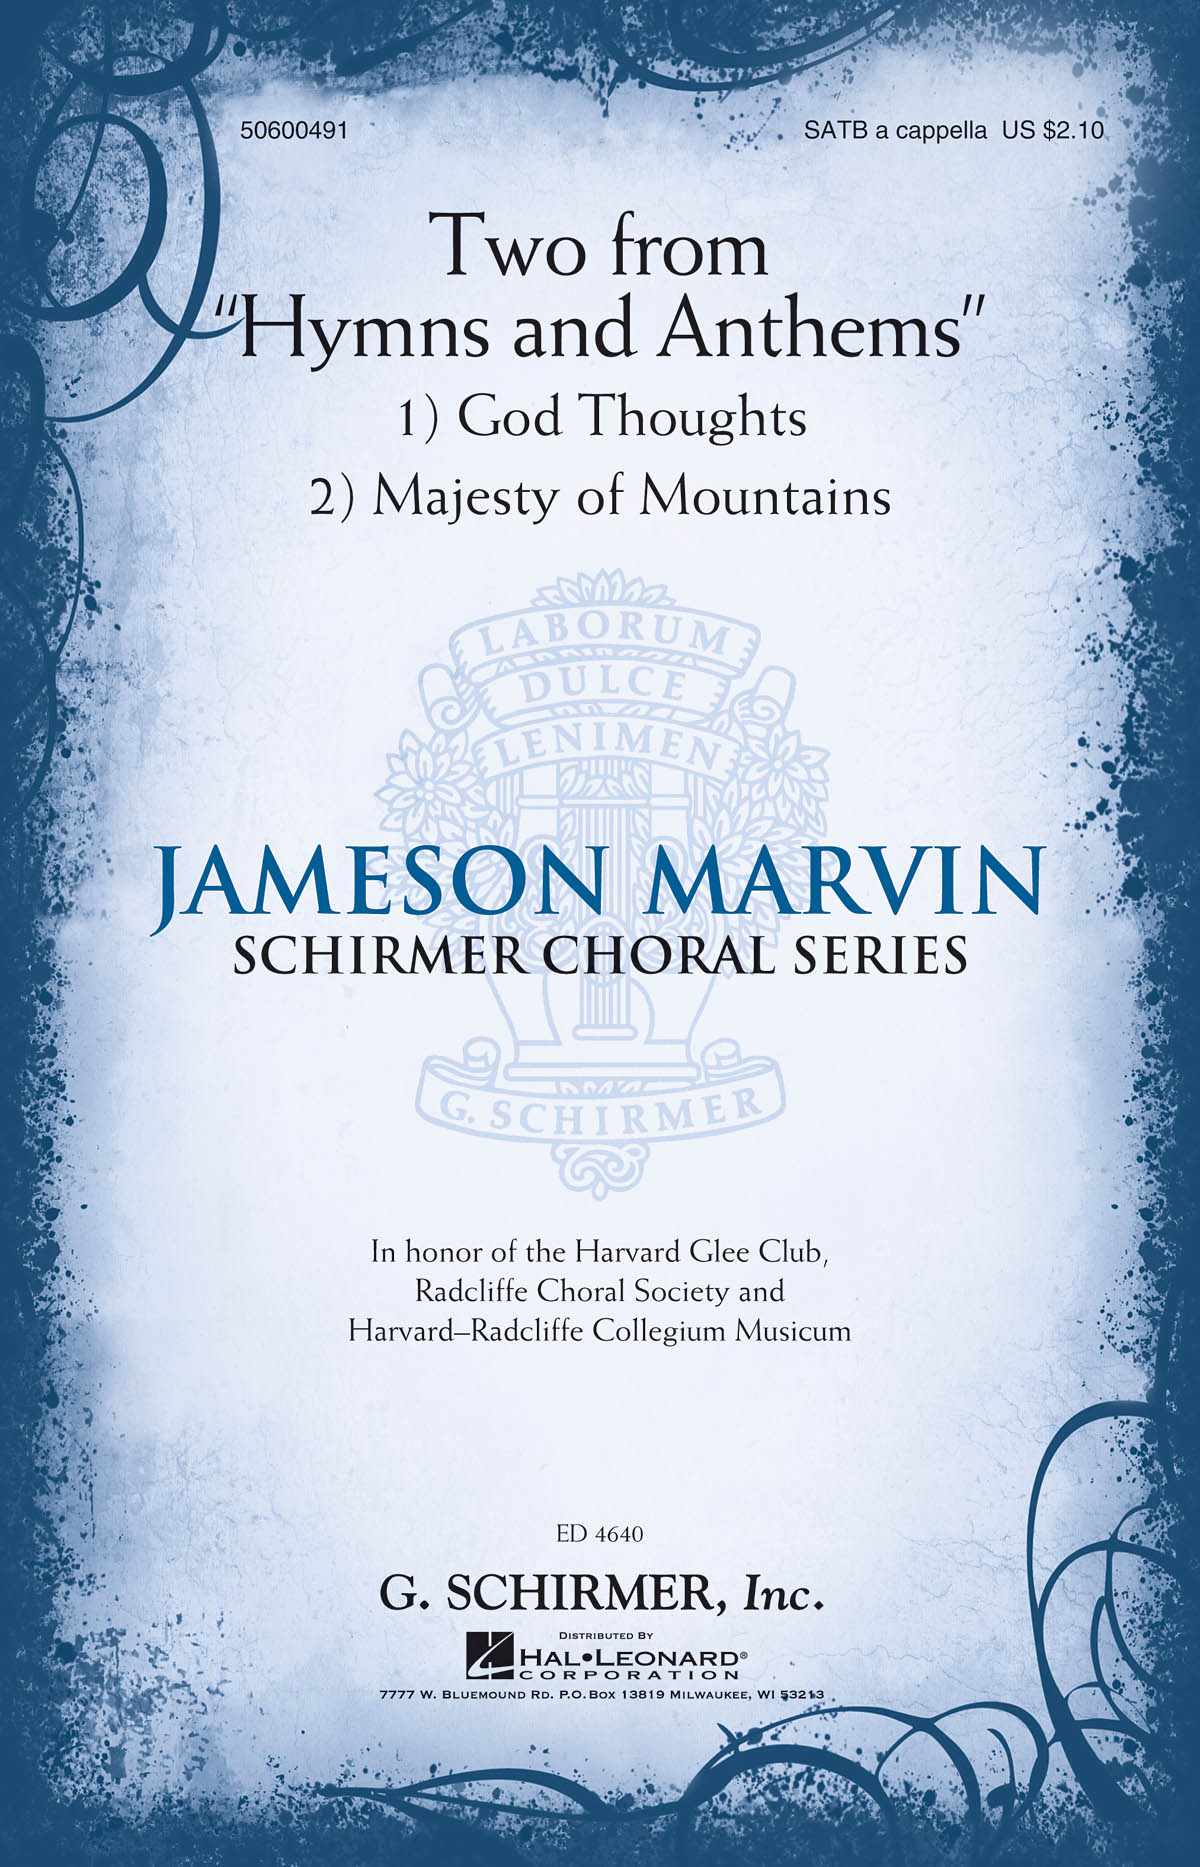 Two from Hymns and Anthems - Jameson Marvin Choral Series noty pro sbor SATB a Cappella